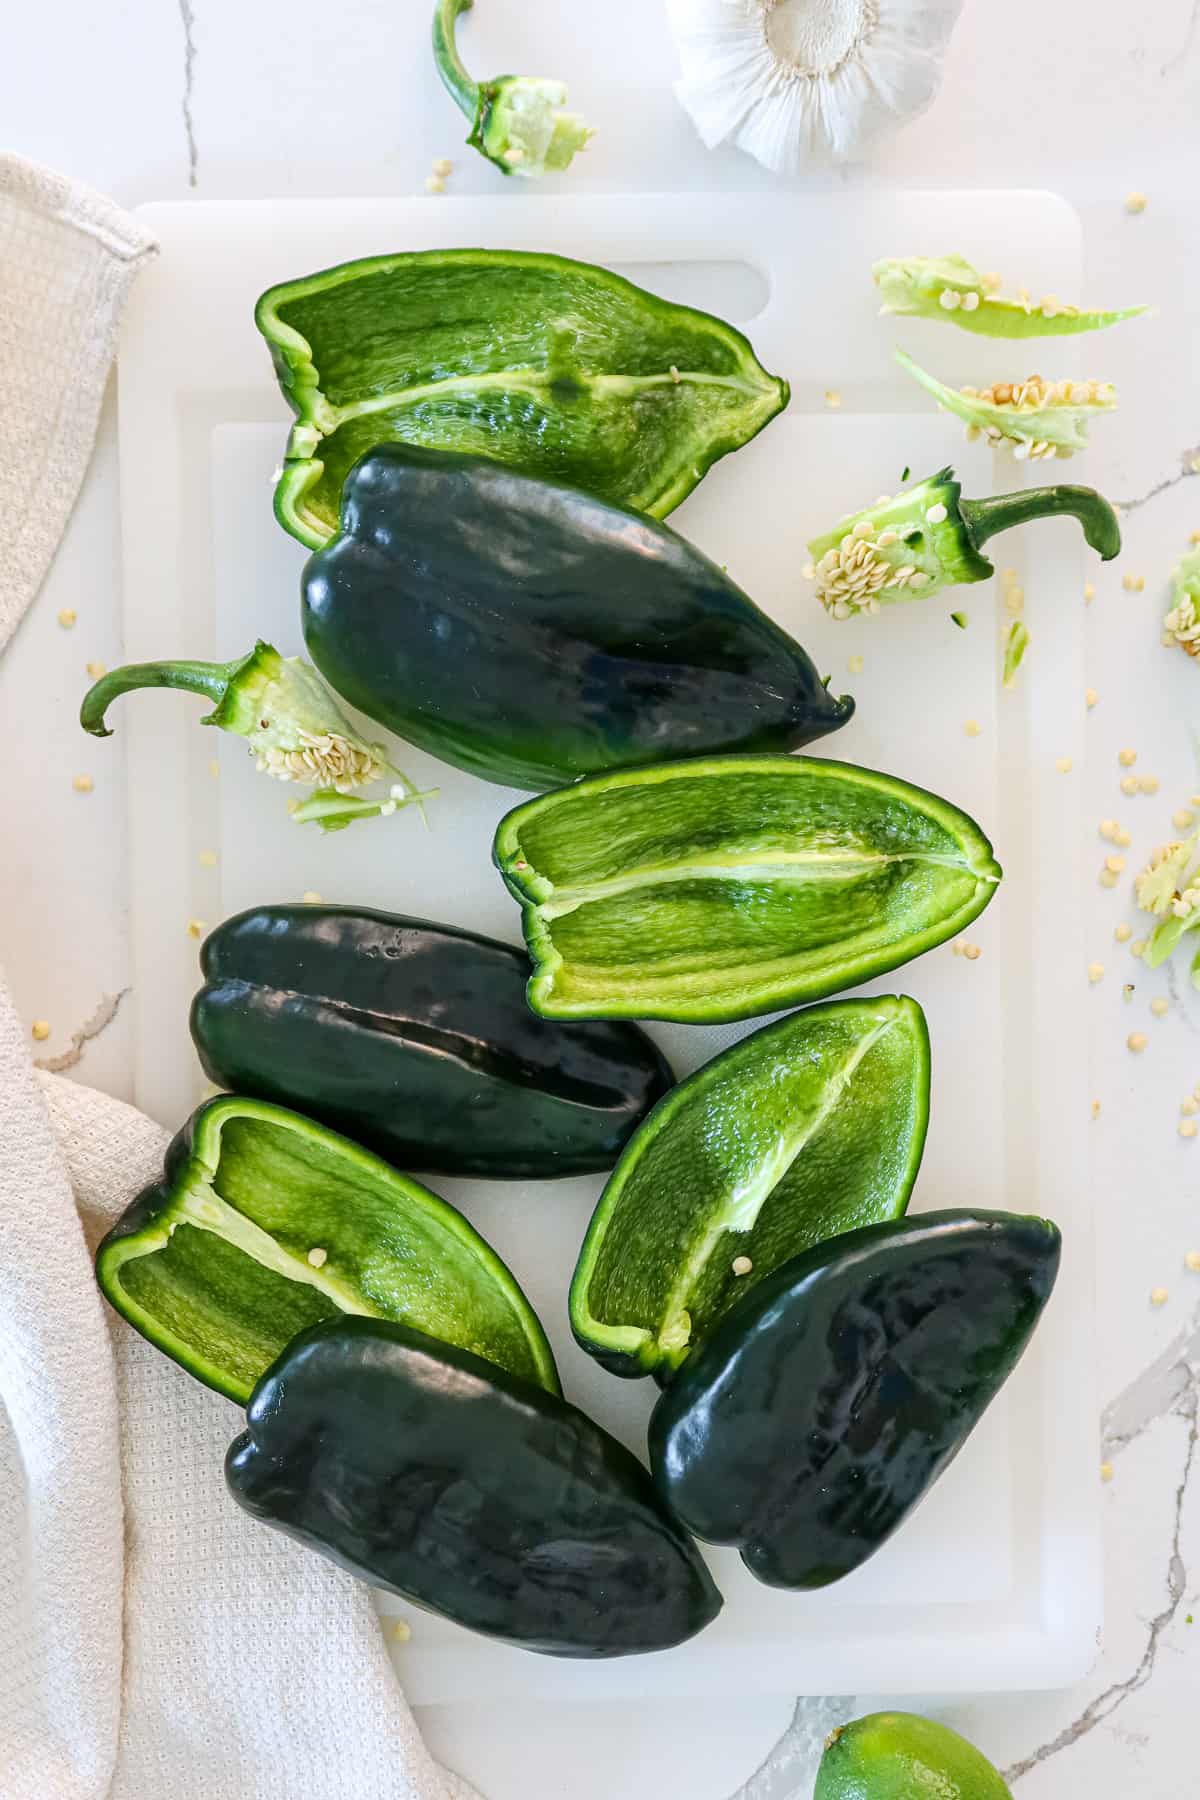 Halved poblano peppers with stems and seeds removed.